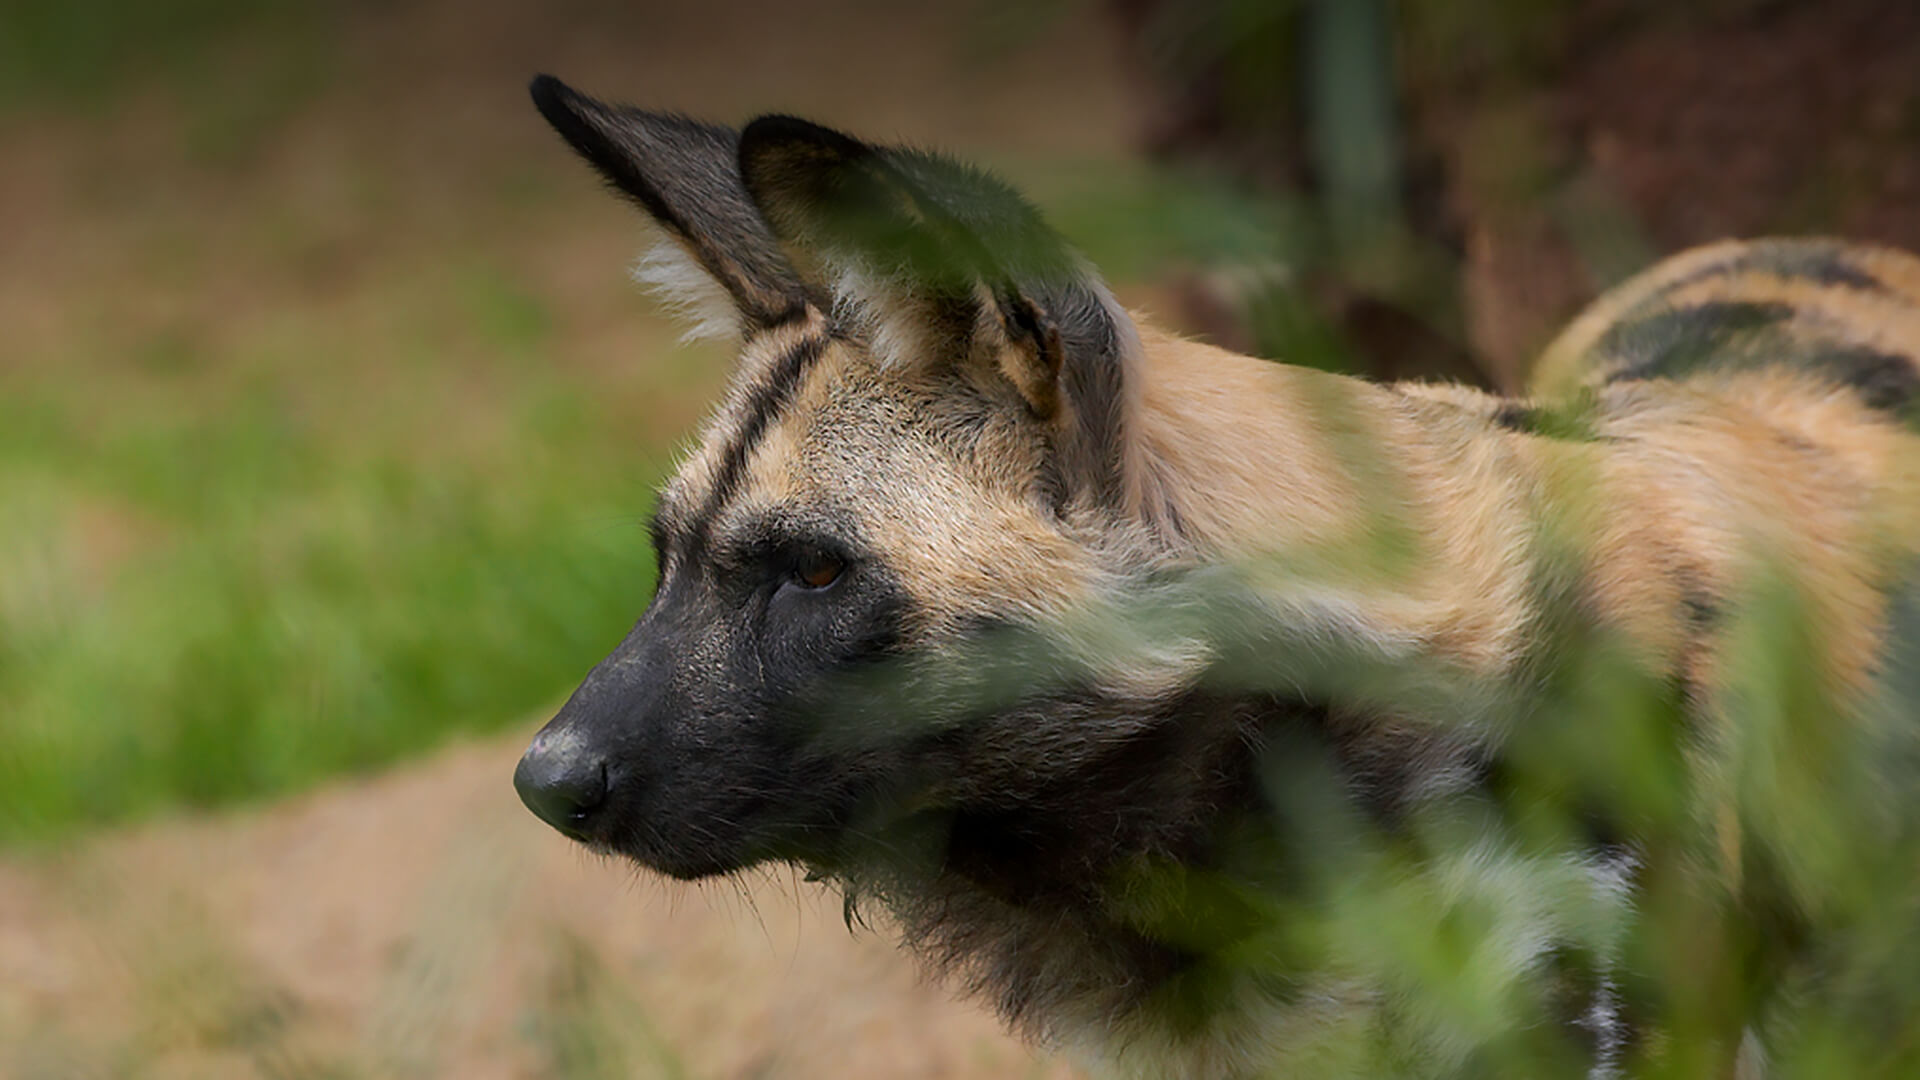 A painted dog looks to the left as it stands behind some blurred grass